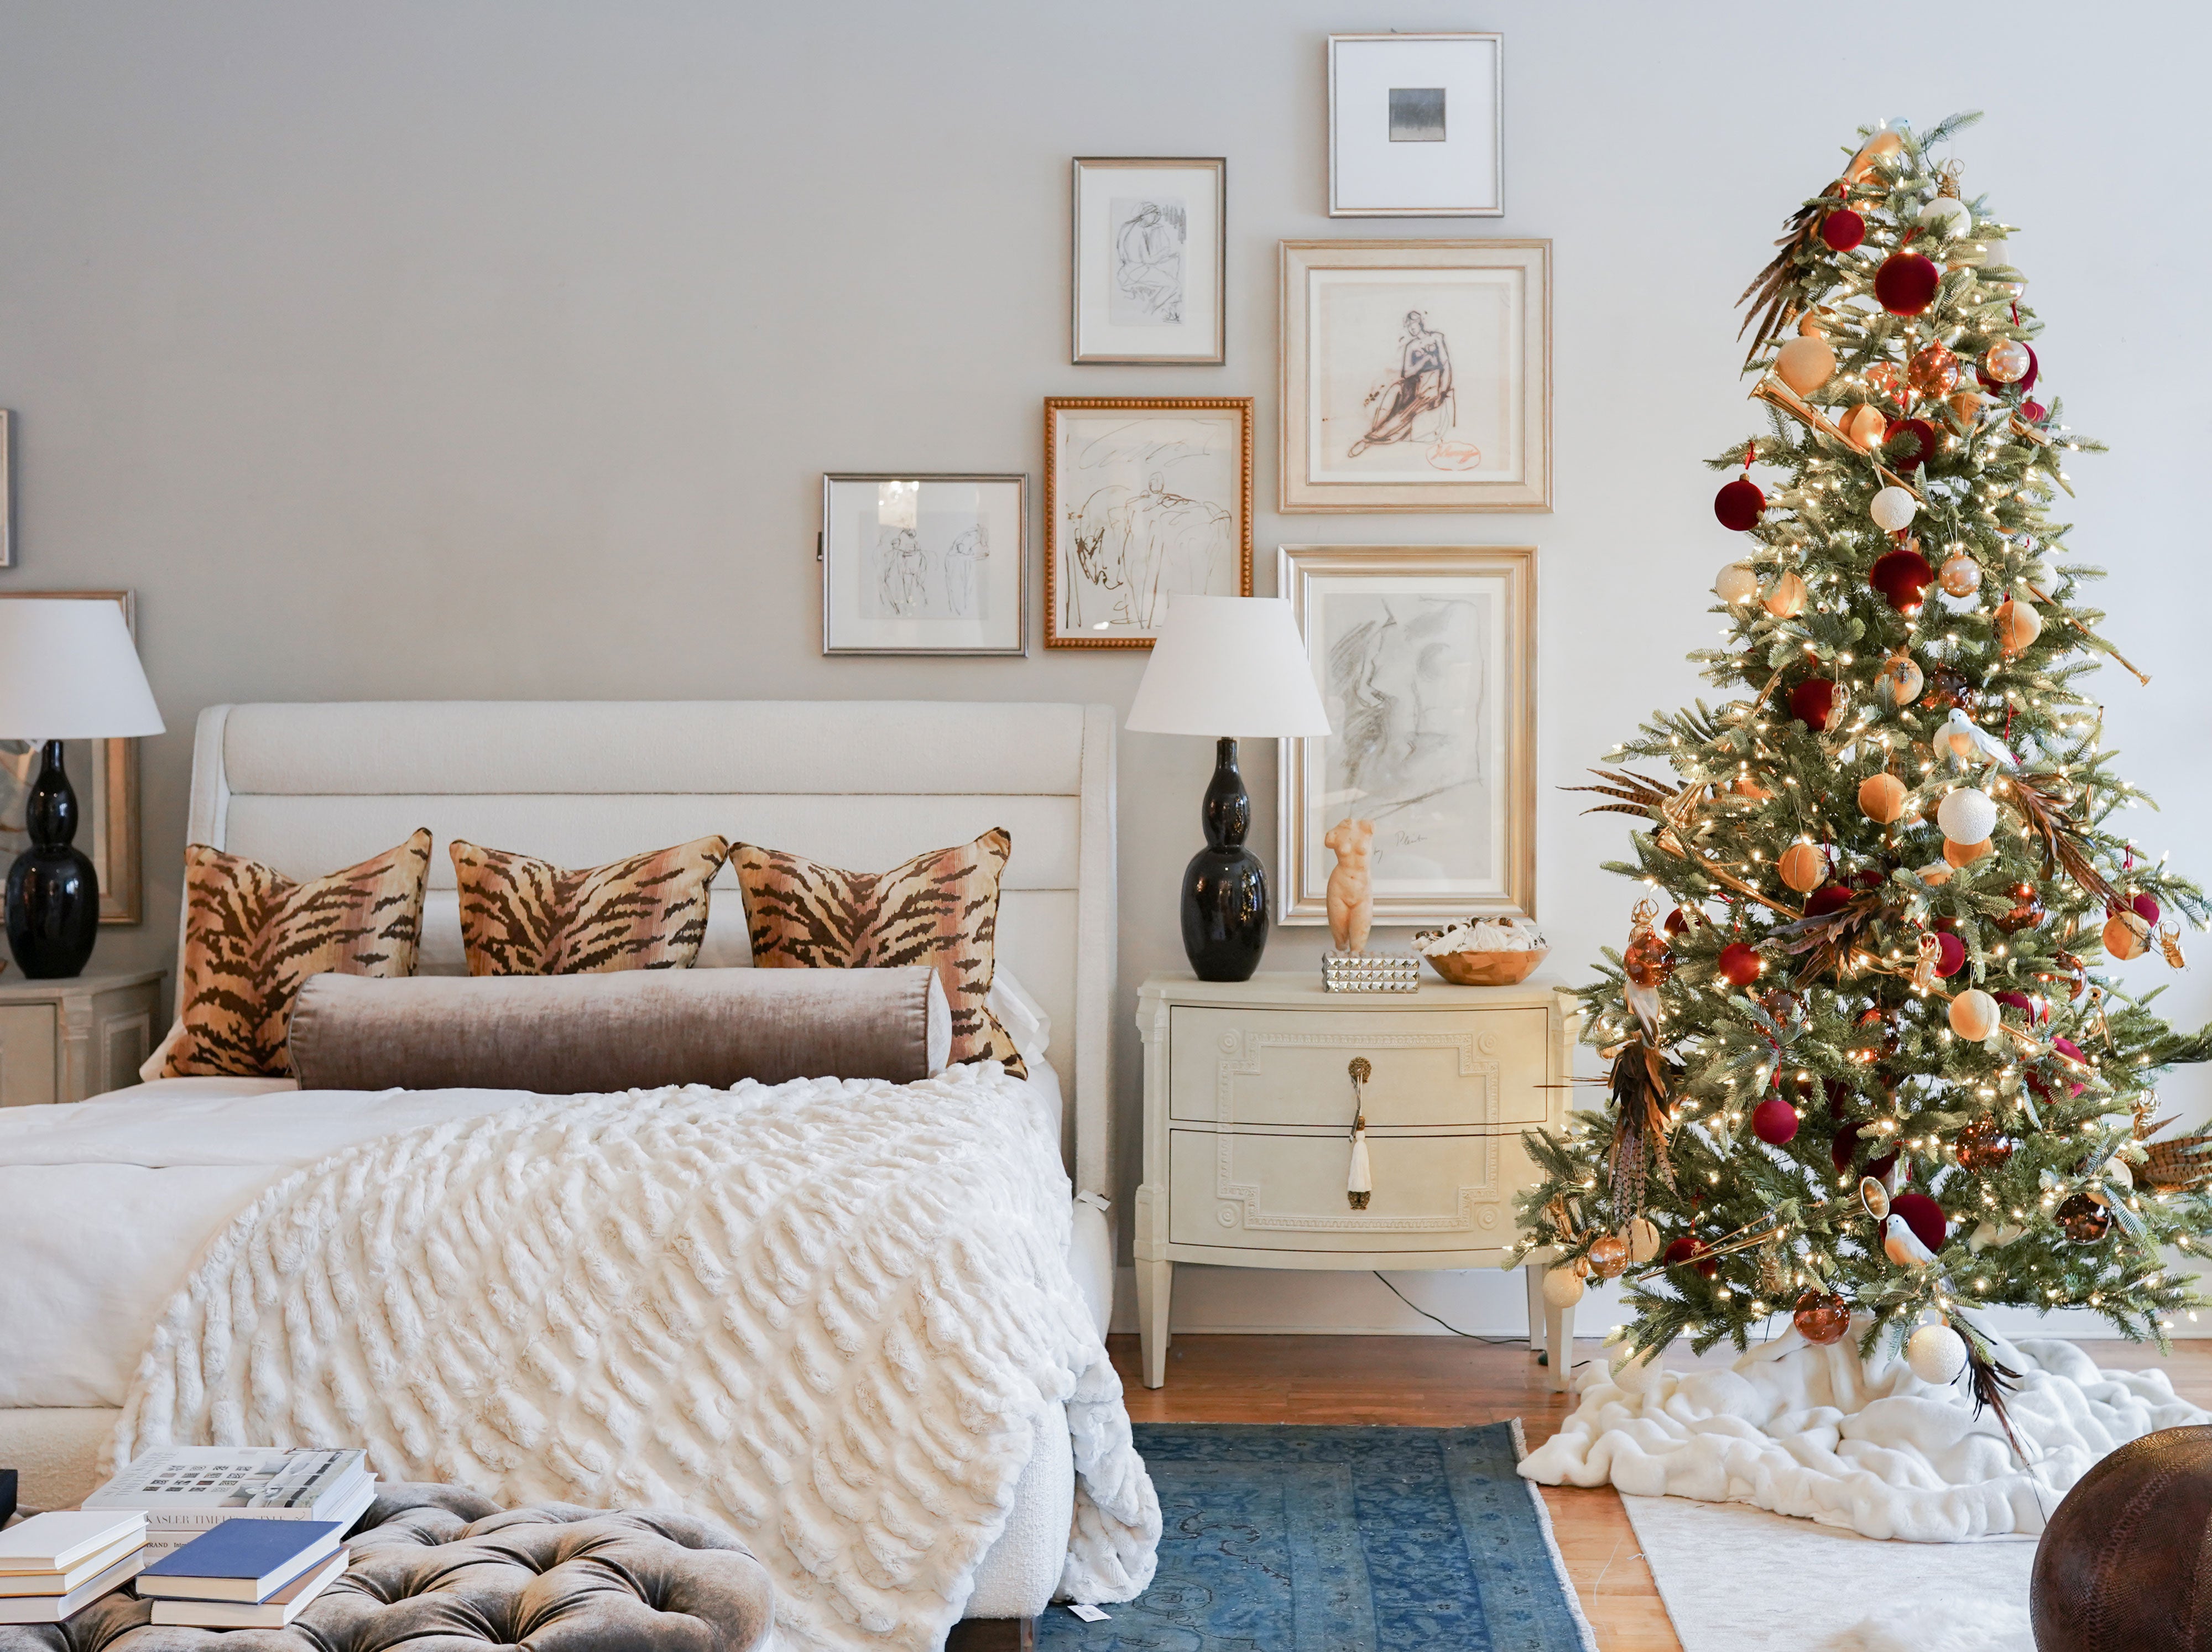 Transform Your Home for the Holidays